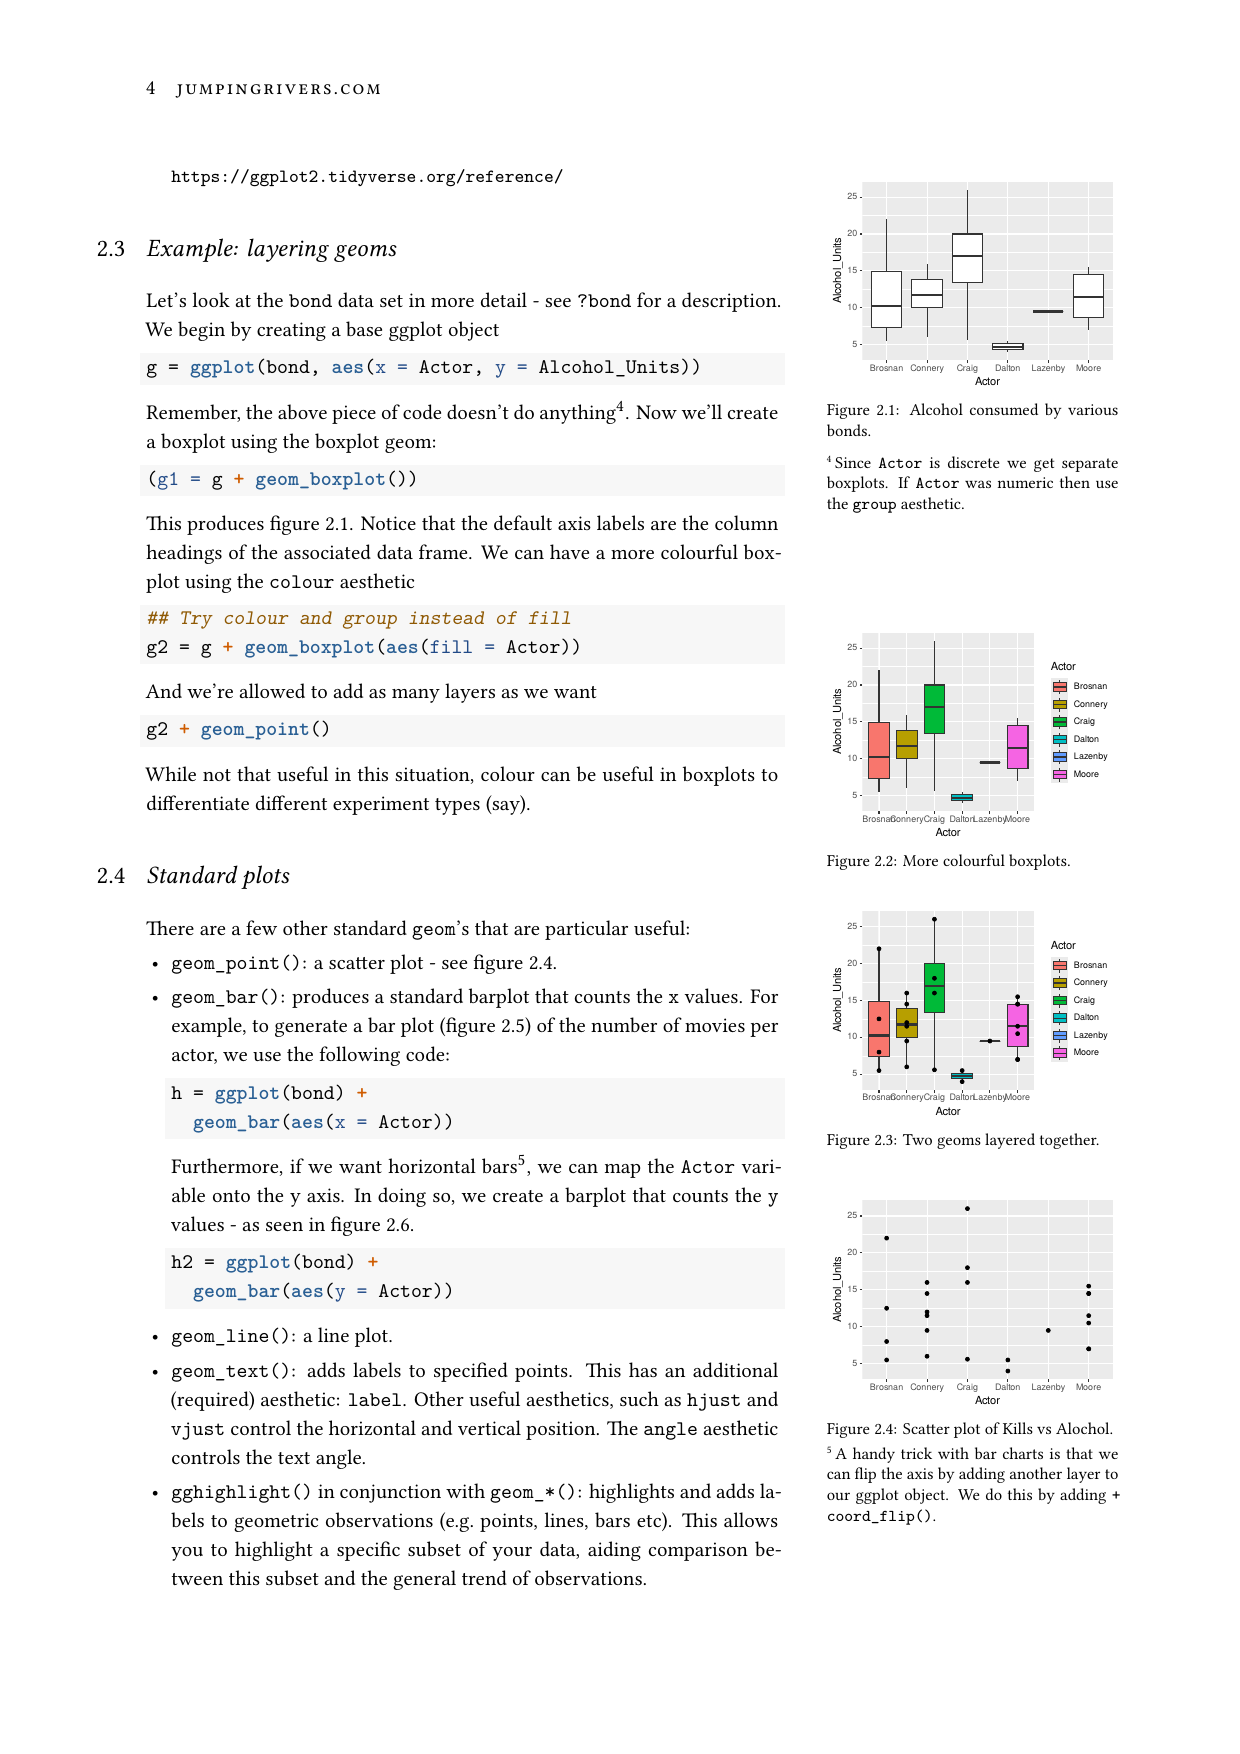 Page 4 of example course material for Advanced Graphics with R